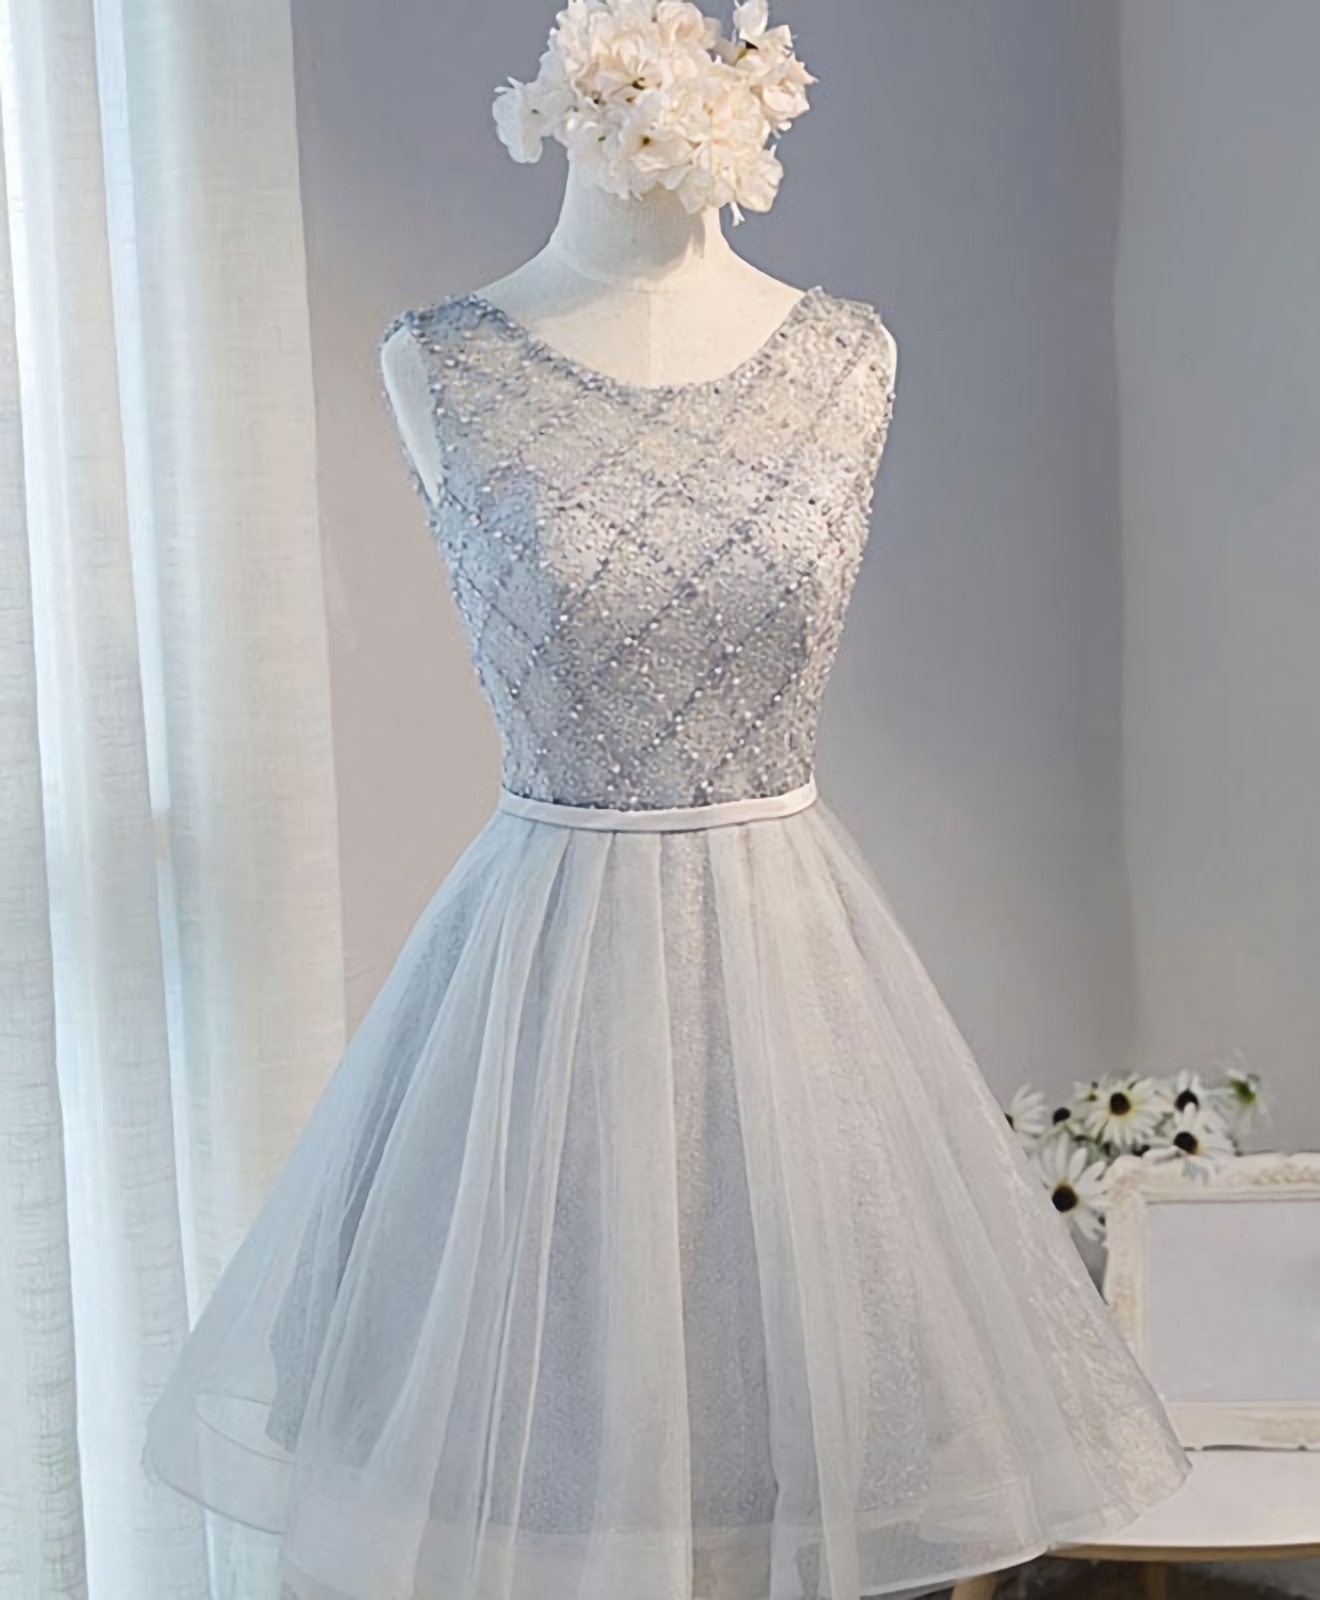 Gray Tulle Beads Short Corset Prom Dress, Gray Corset Homecoming Dress outfit, Evening Dresses For Party